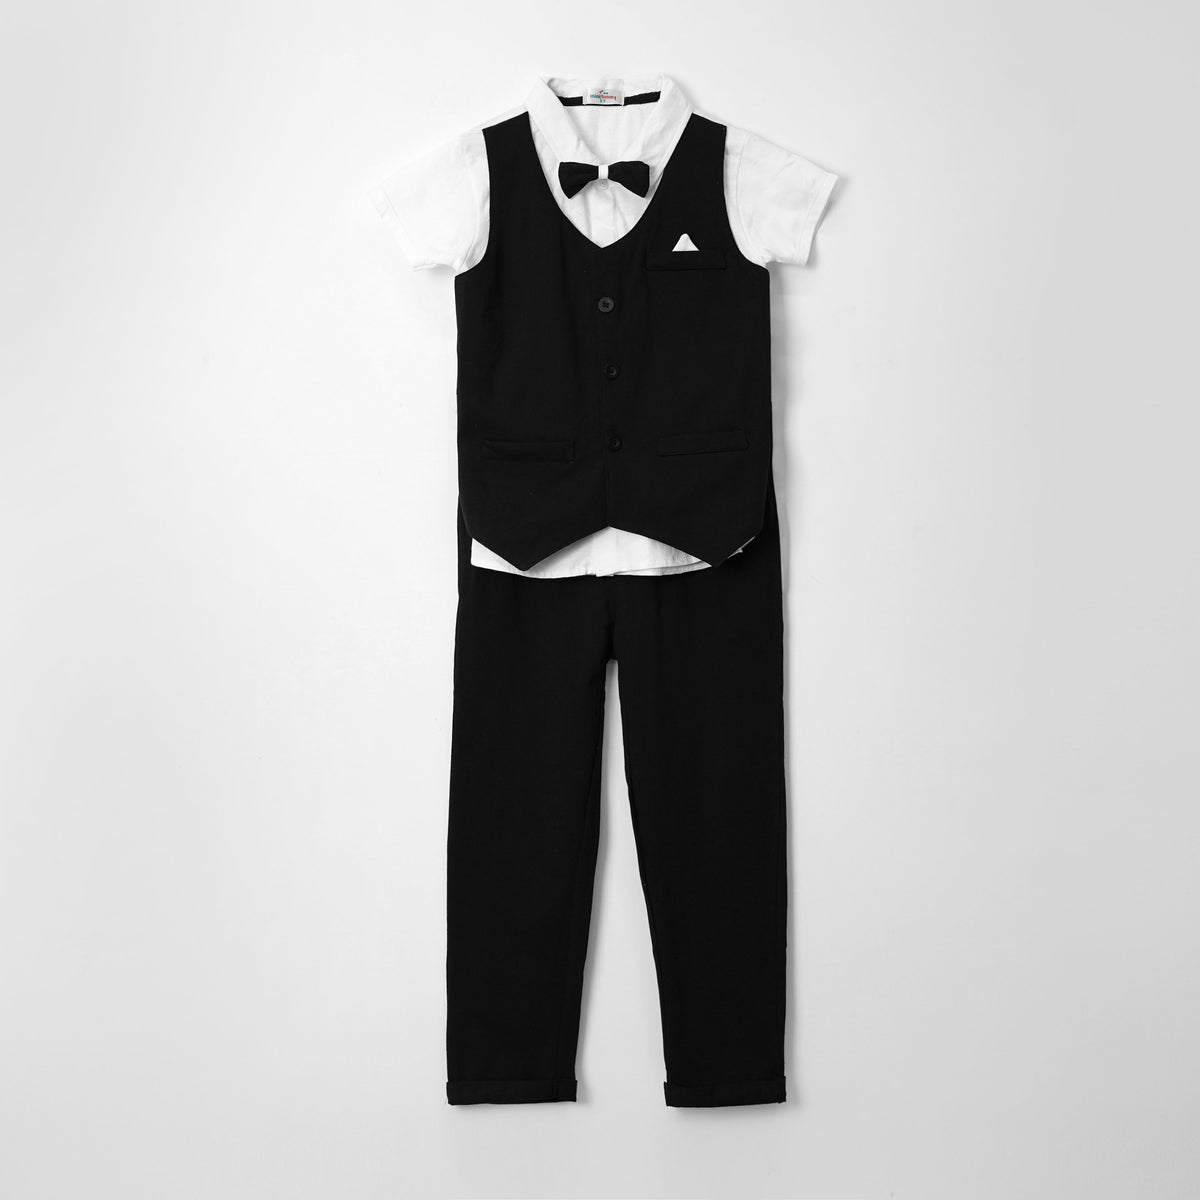 Boy Short Sleeve 2 Piece Black Party Suit With Bow Tie